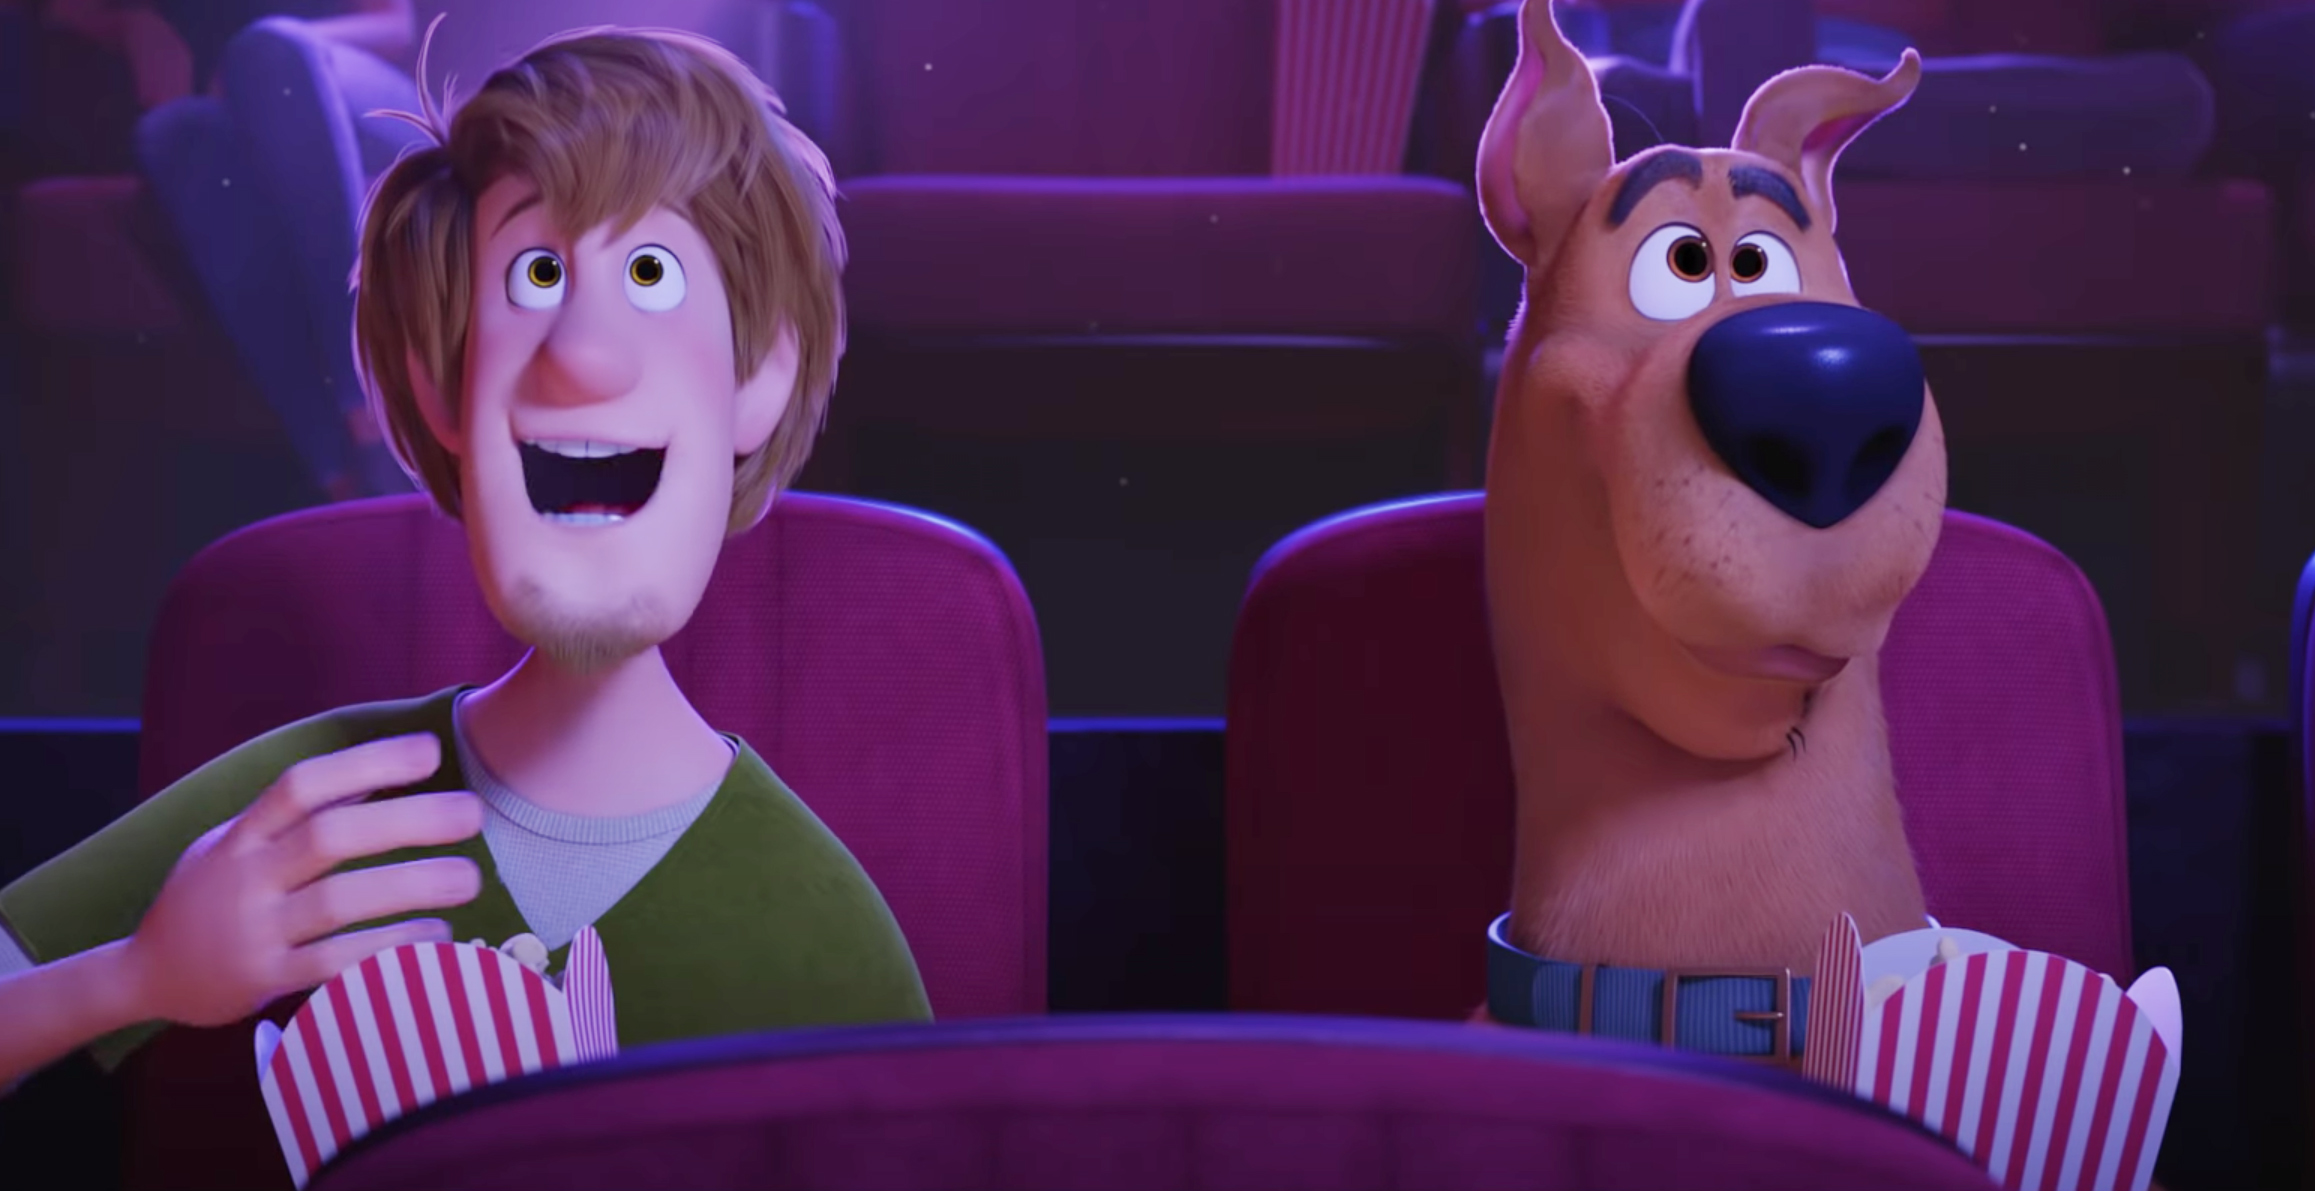 New ScoobyDoo movie, ‘Scoob!’ will premiere Friday, May 15, in your